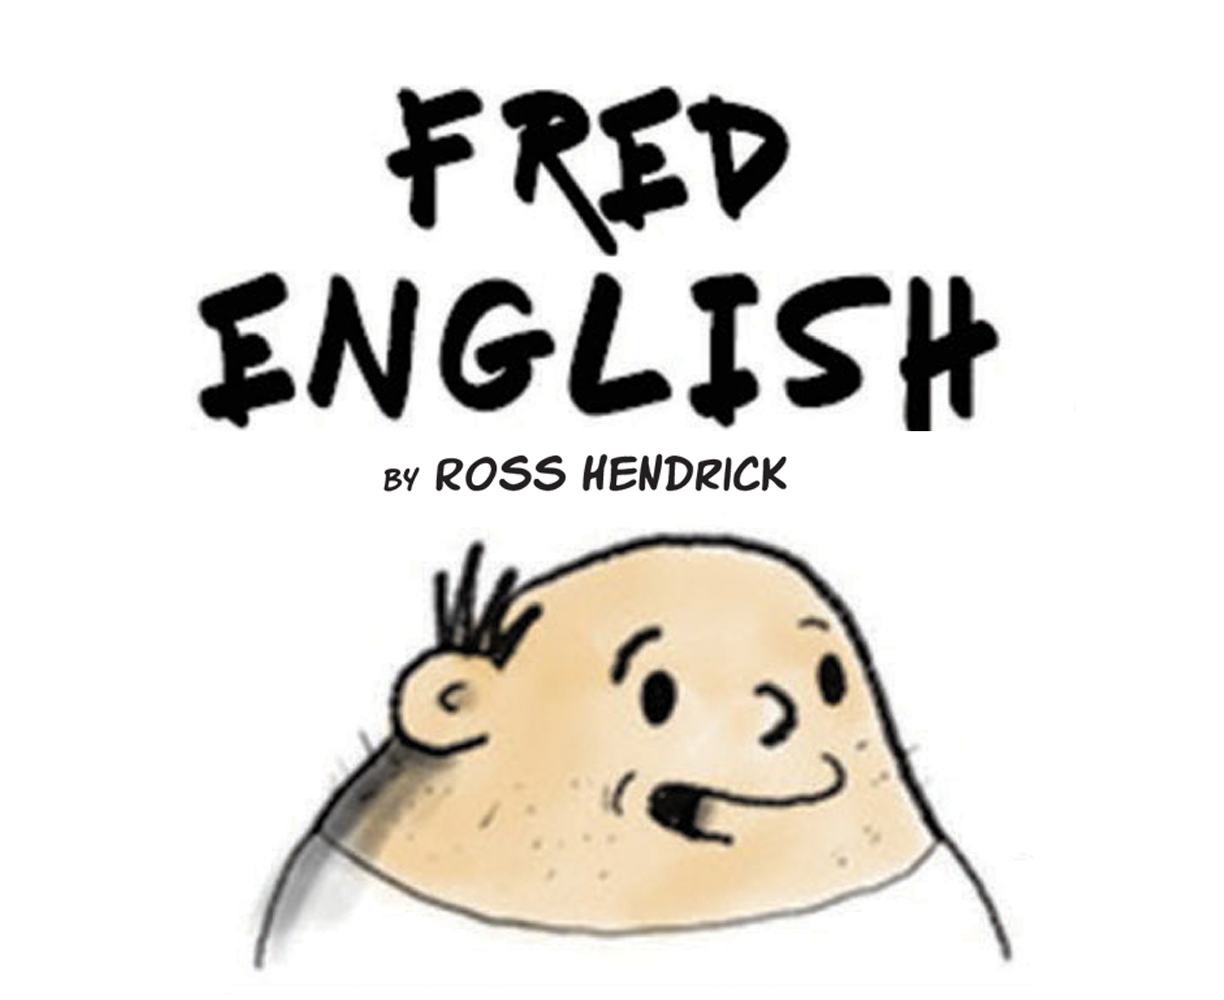 Fred English 3 episode cover